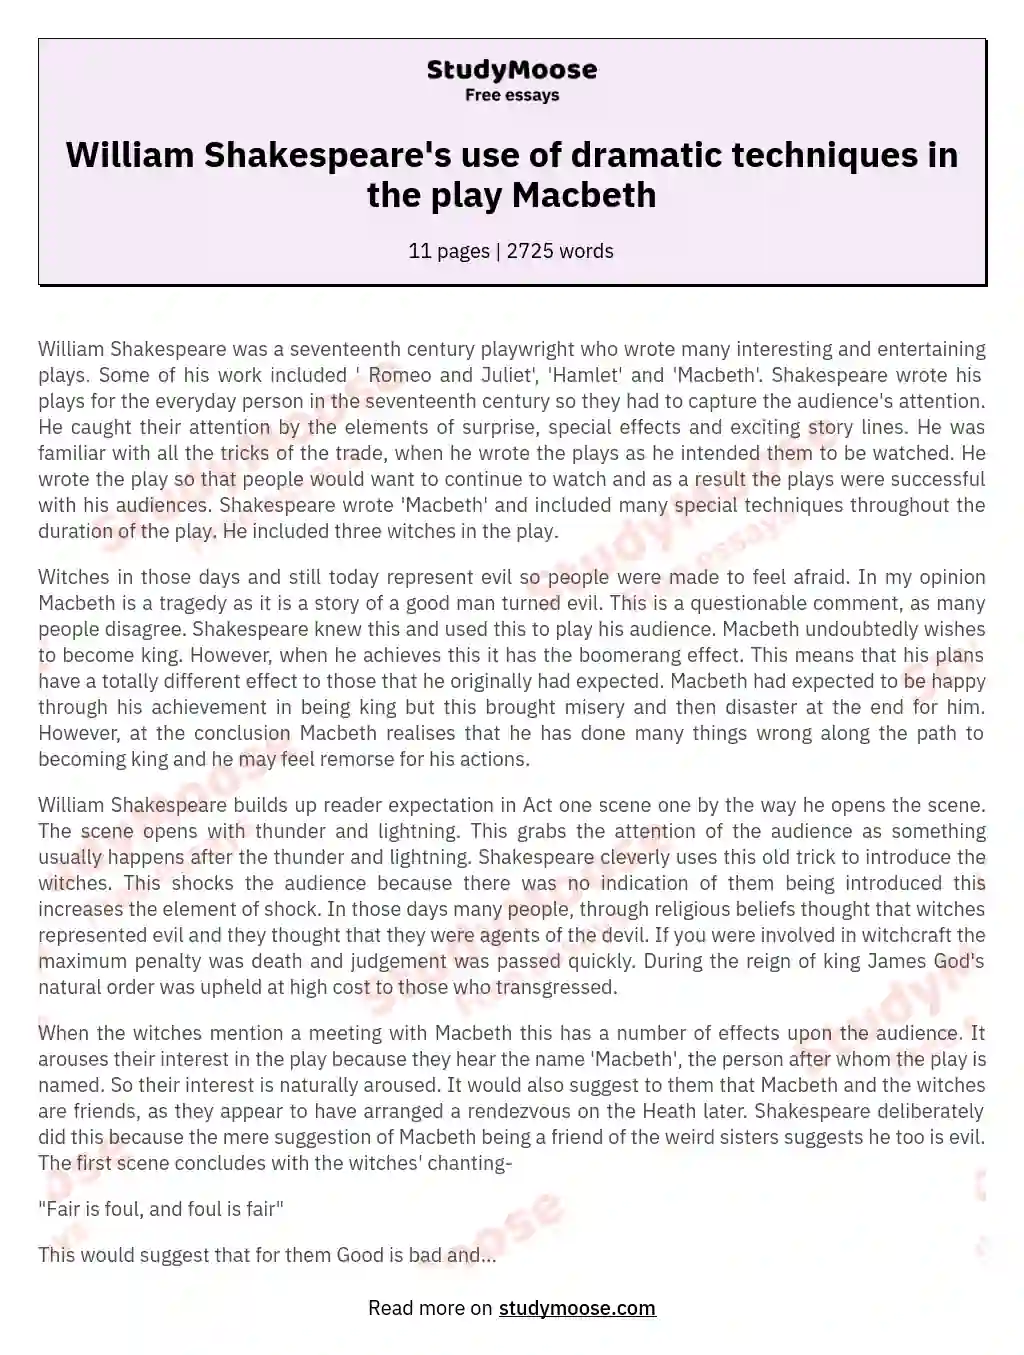 William Shakespeare's use of dramatic techniques in the play Macbeth essay